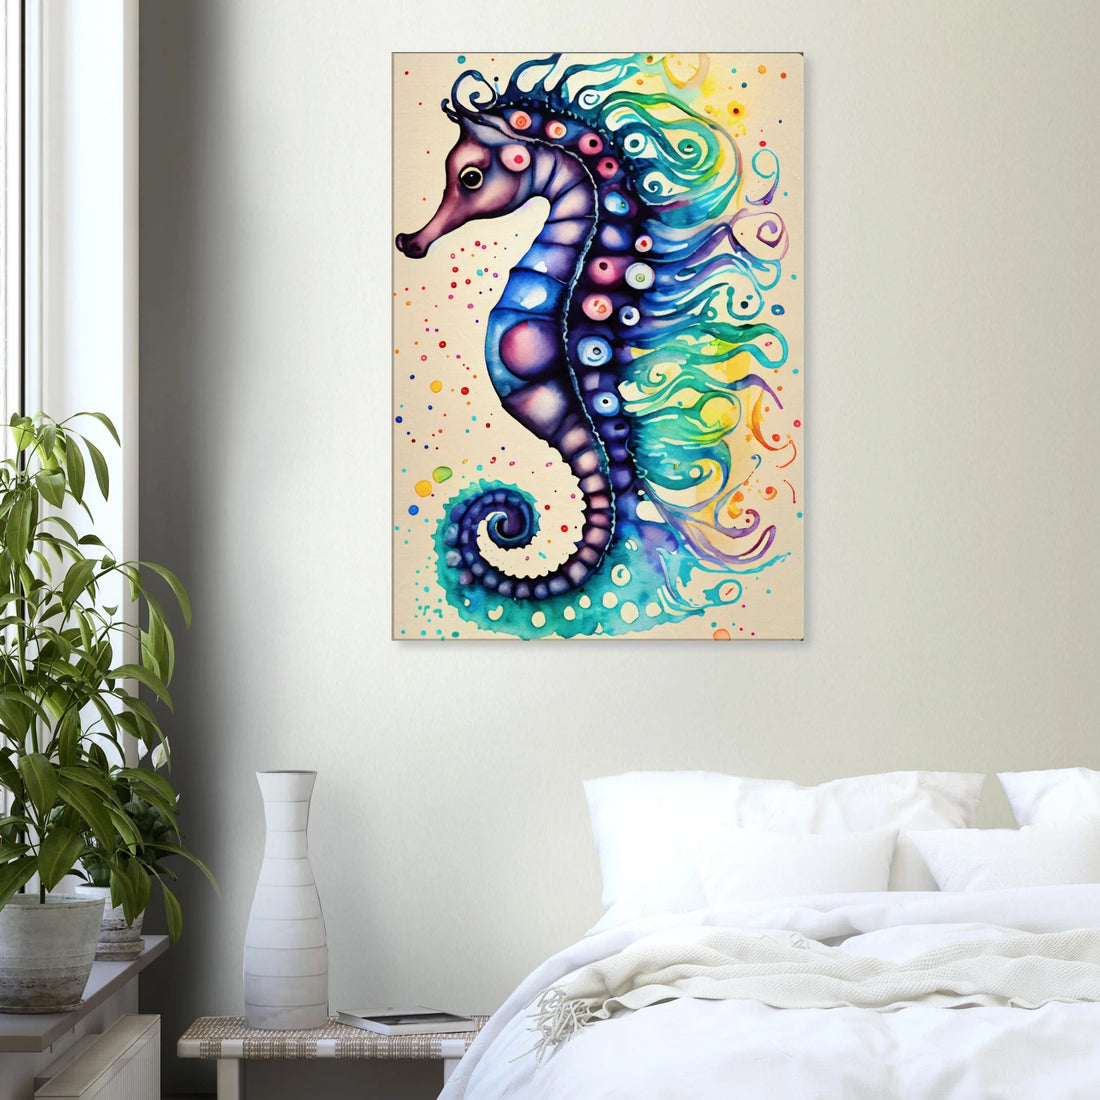 A seahorse is a gift that brings good luck. - Posterify